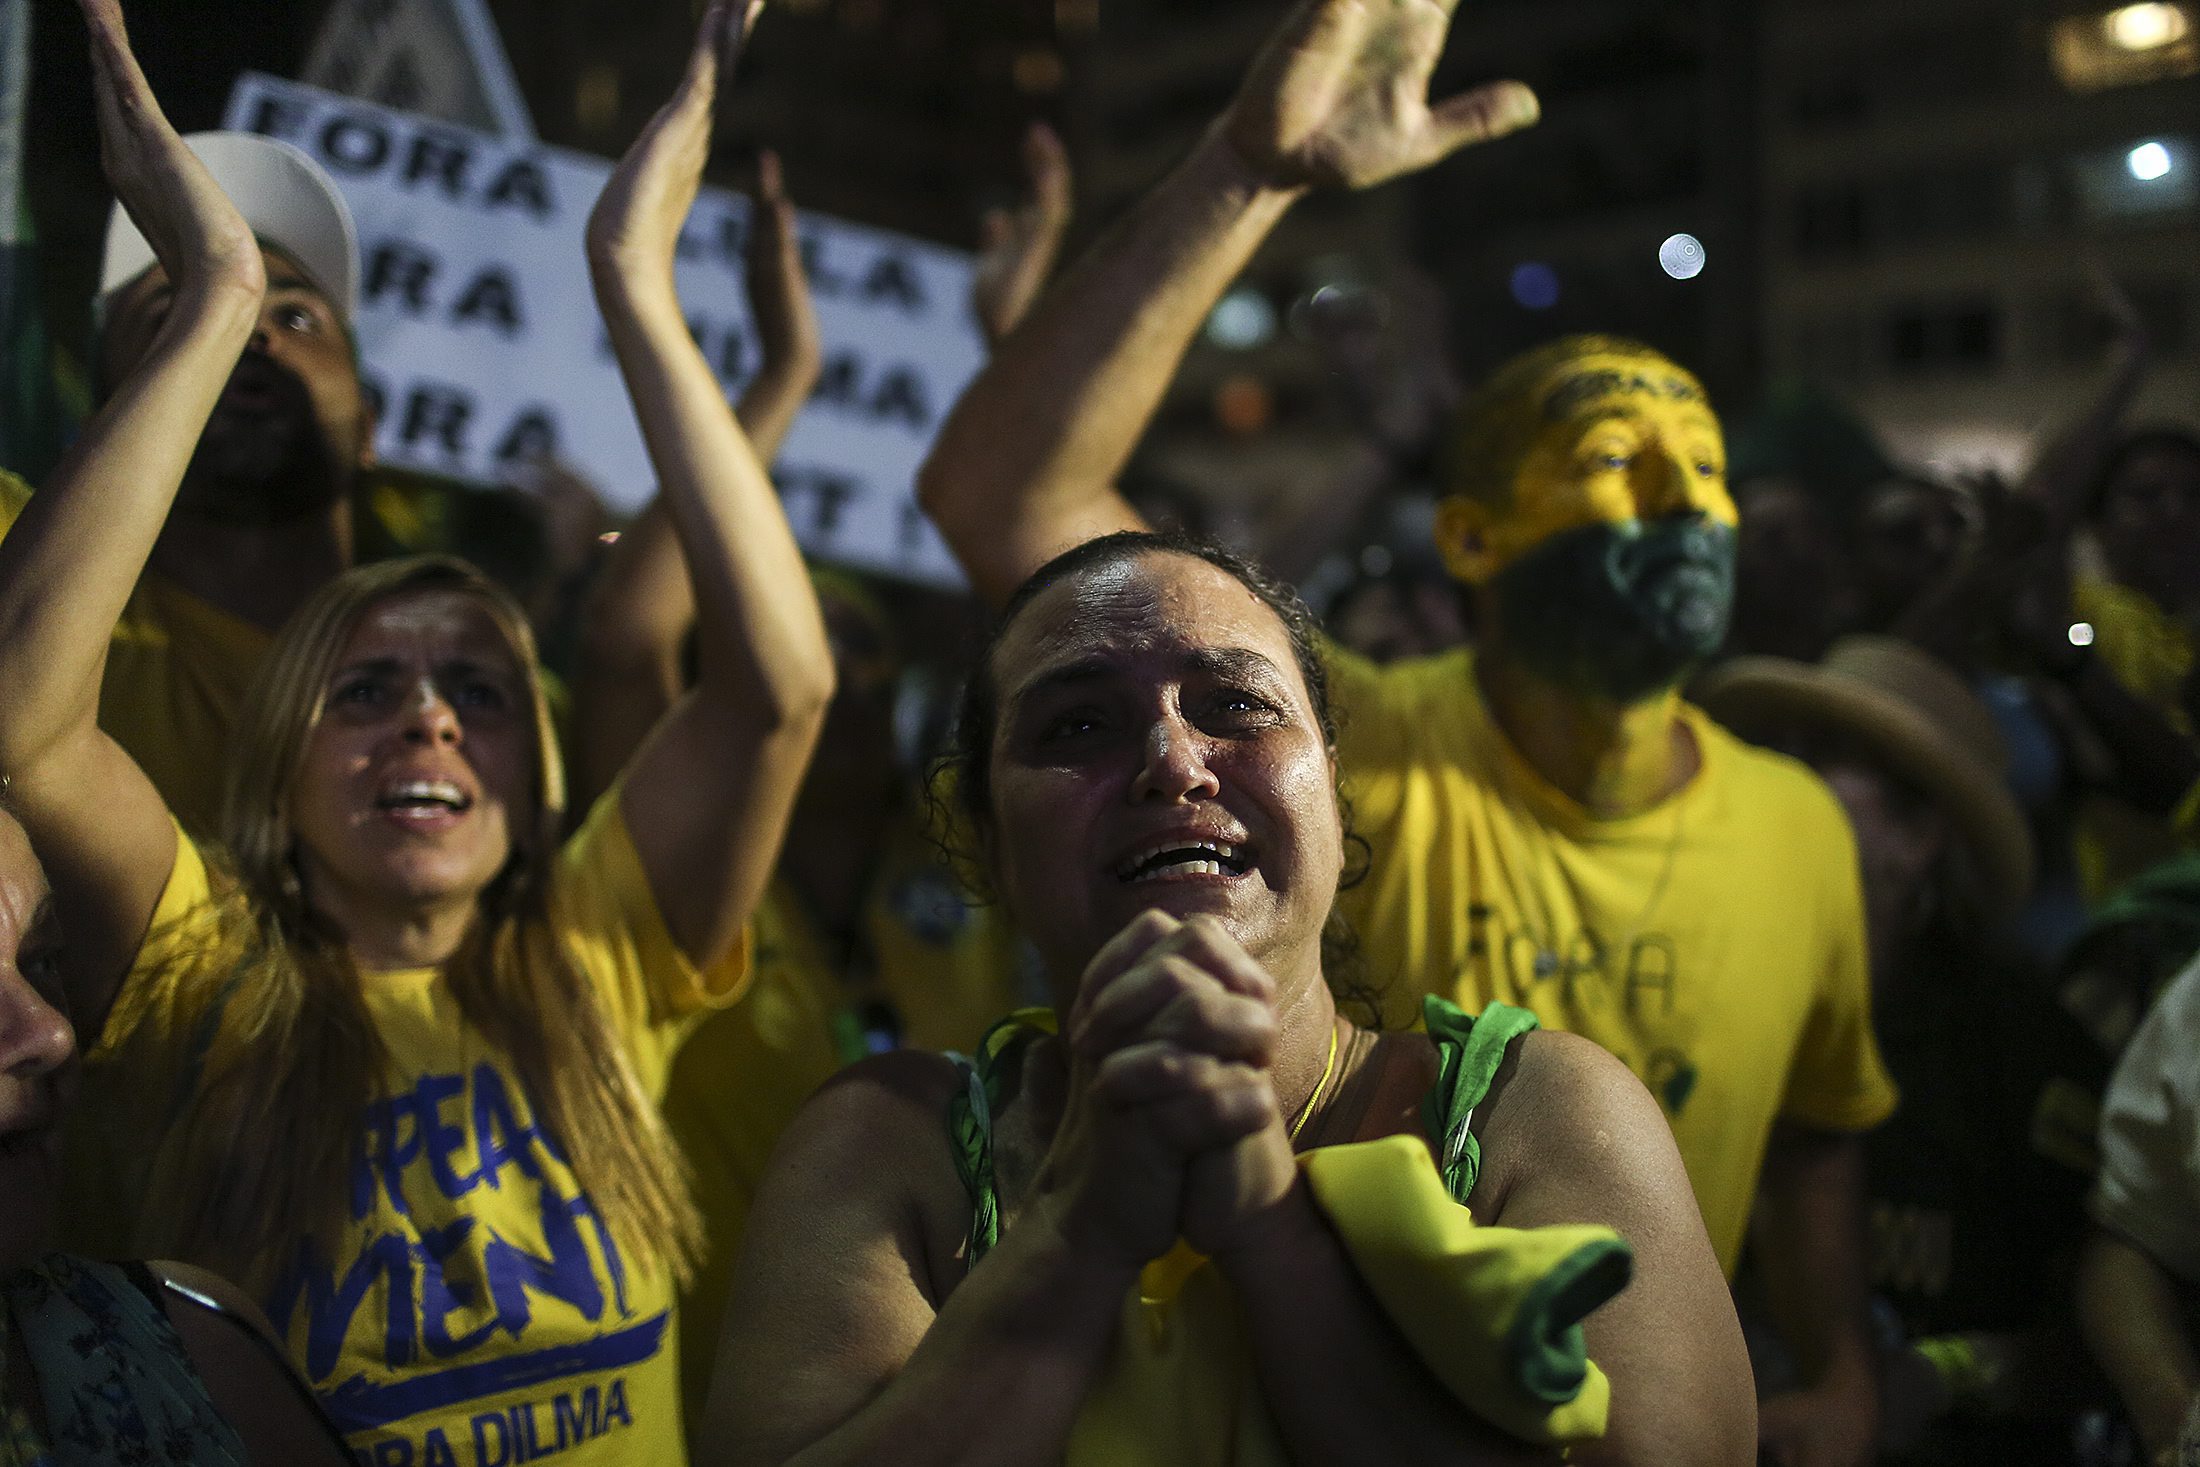 PHOTO: Brazilian citizens celebrate the result of the vote in the Lower House concerning the impeachment proceedings for Brazilian President Dilma Rousseff in Rio de Janeiro, April 17, 2016.